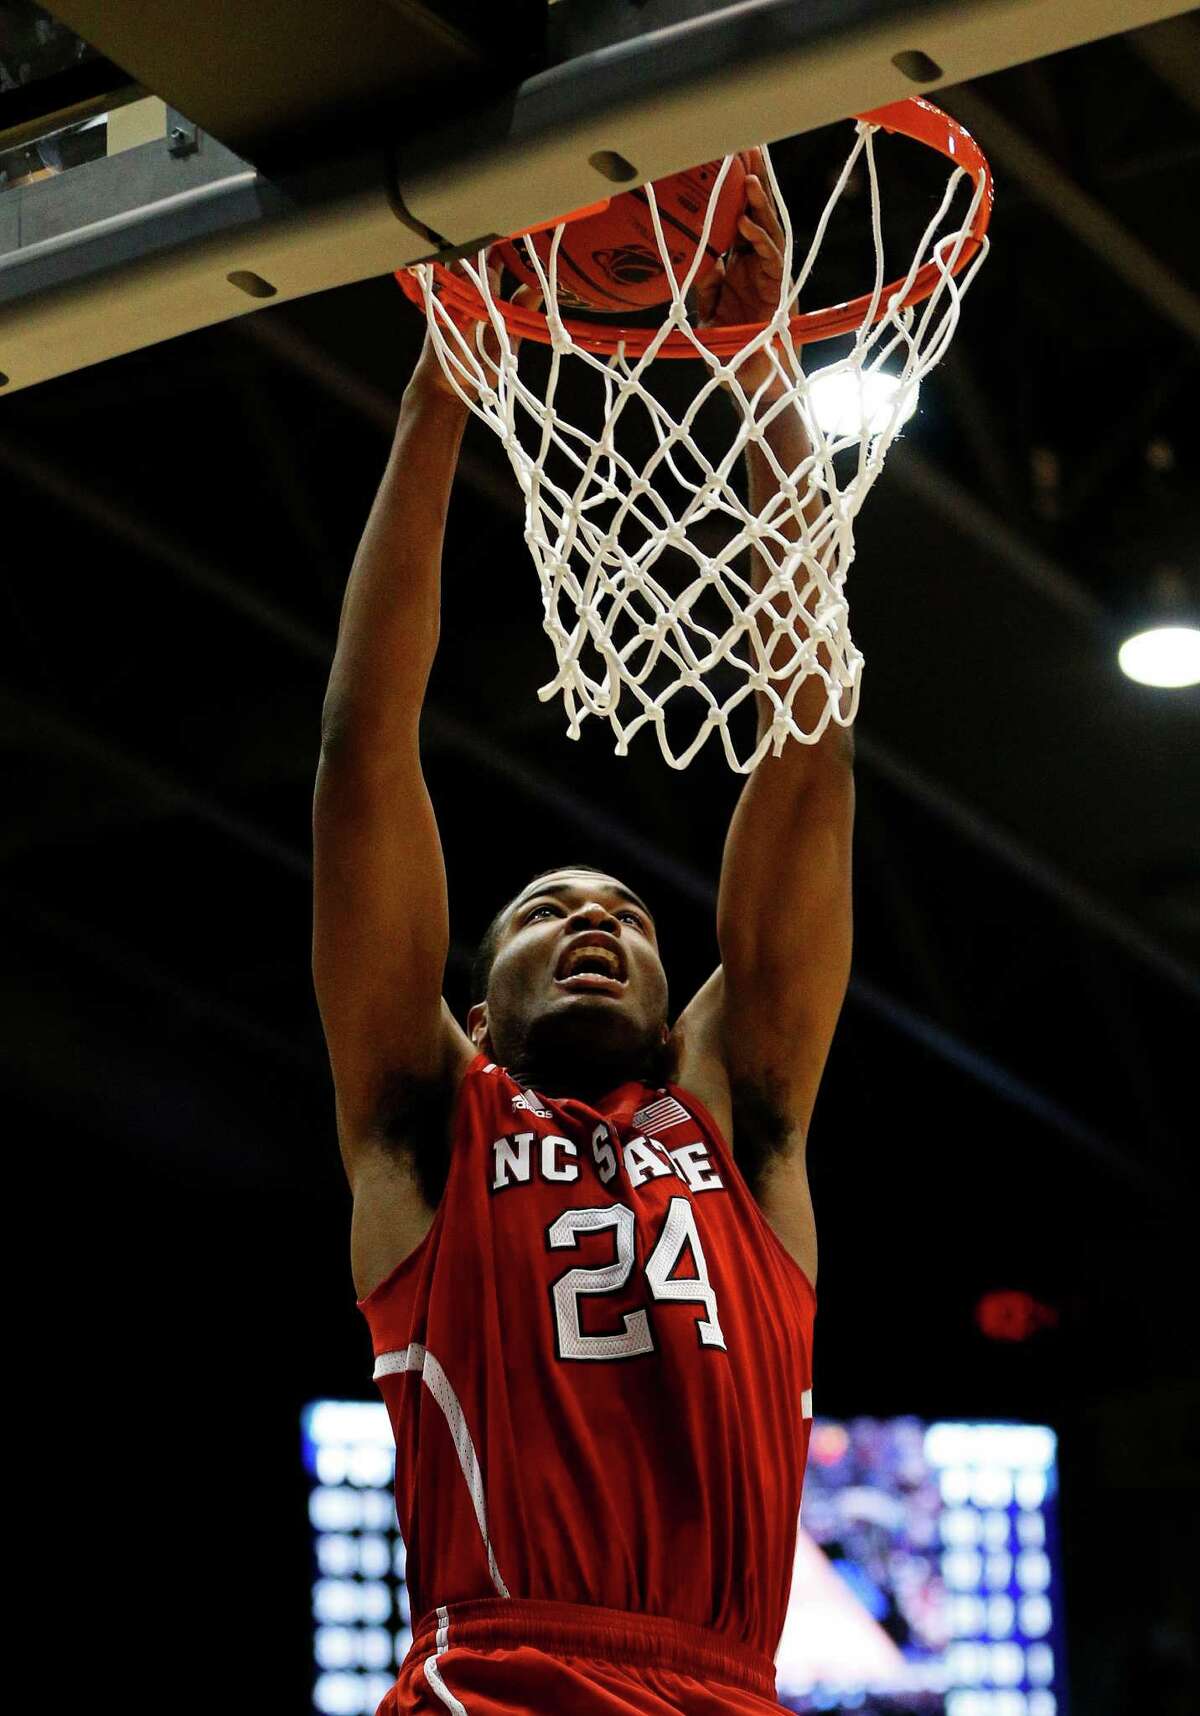 DAYTON, OH - MARCH 18: T.J. Warren #24 of the North Carolina State Wolfpack dunks against the Xavier Musketeers in the second half during the first round of the 2014 NCAA Men's Basketball Tournament at at University of Dayton Arena on March 18, 2014 in Dayton, Ohio. (Photo by Gregory Shamus/Getty Images) ORG XMIT: 459540383